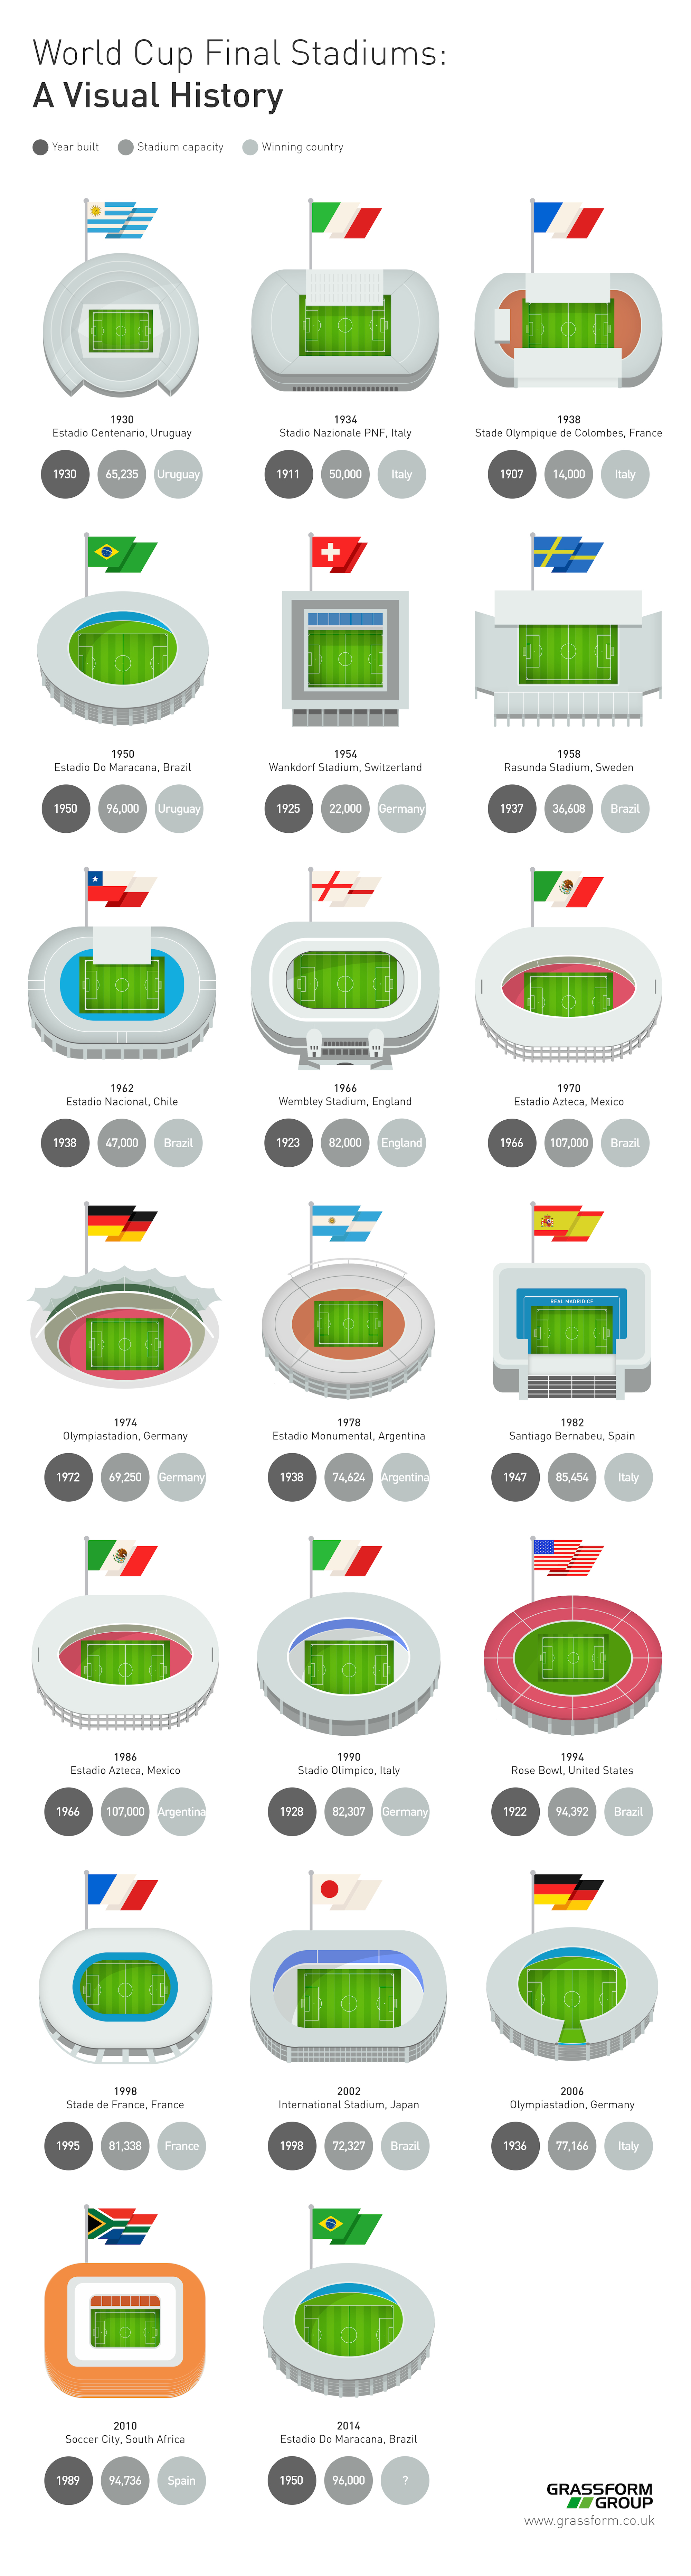 World Cup Final Stadiums: A Visual History infographic